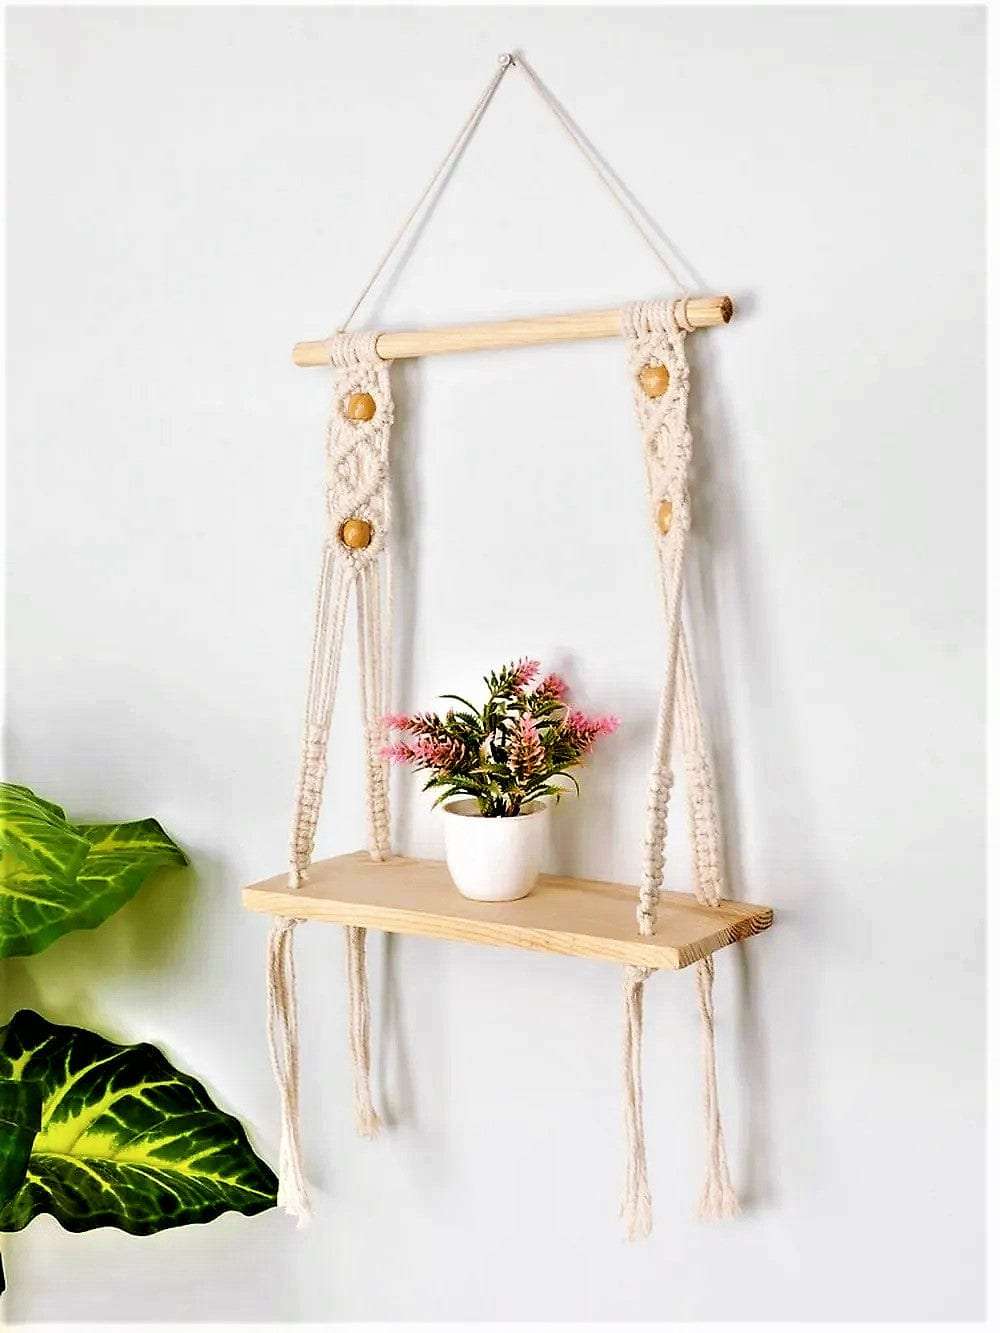 Macrame wall hanging shelf with open back chain pattern Writings On The Wall Wall Hanging